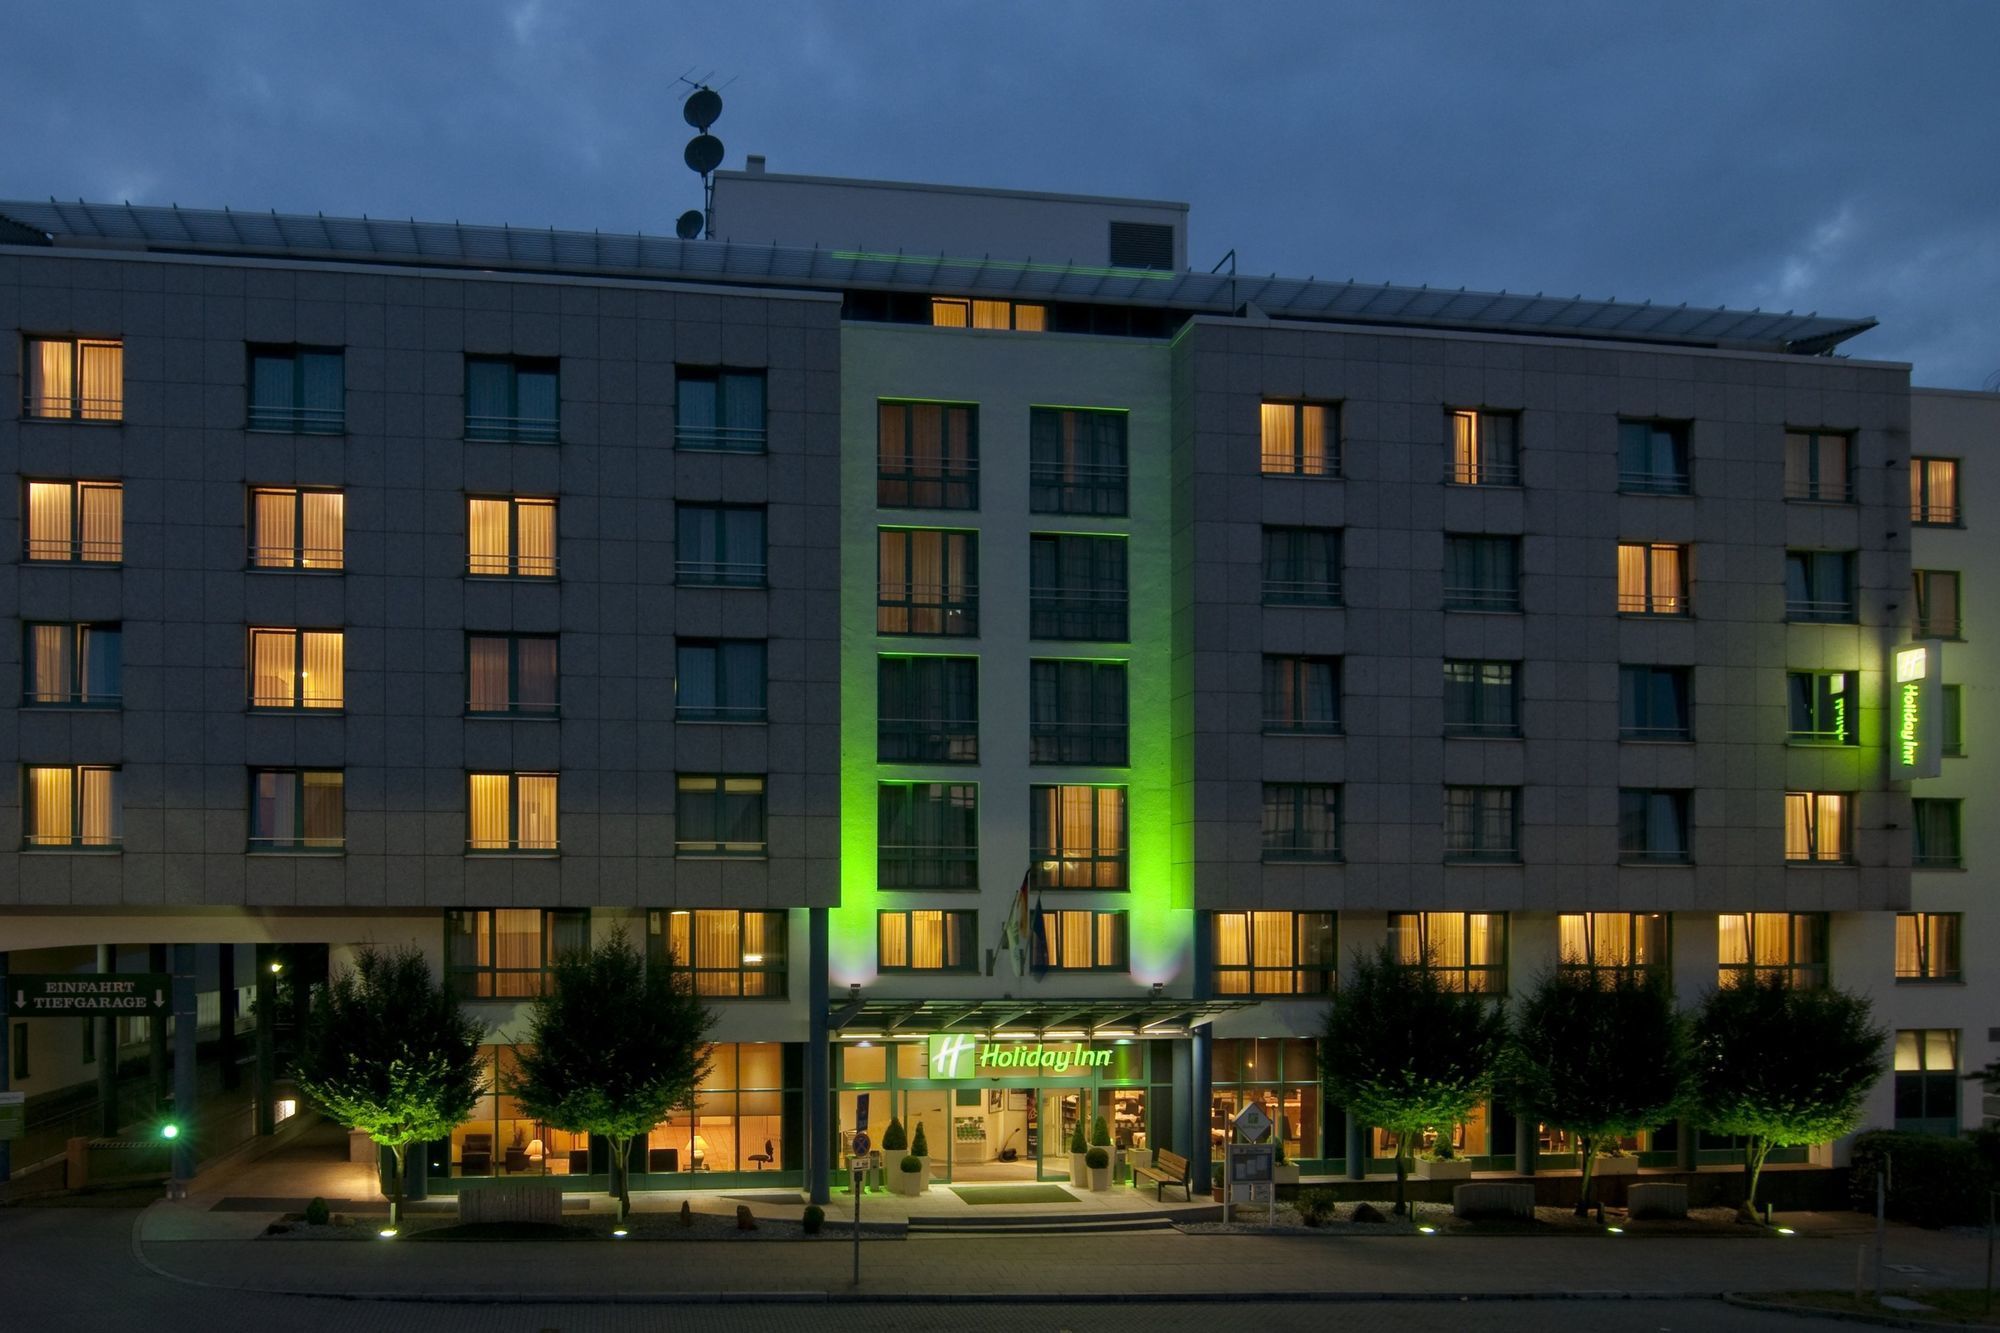 Holiday Inn Essen City Centre <br/>68.89 ew <br/> <a href='http://vakantieoplossing.nl/outpage/?id=9049f454cfabd3bd1635339f126311a1' target='_blank'>View Details</a>